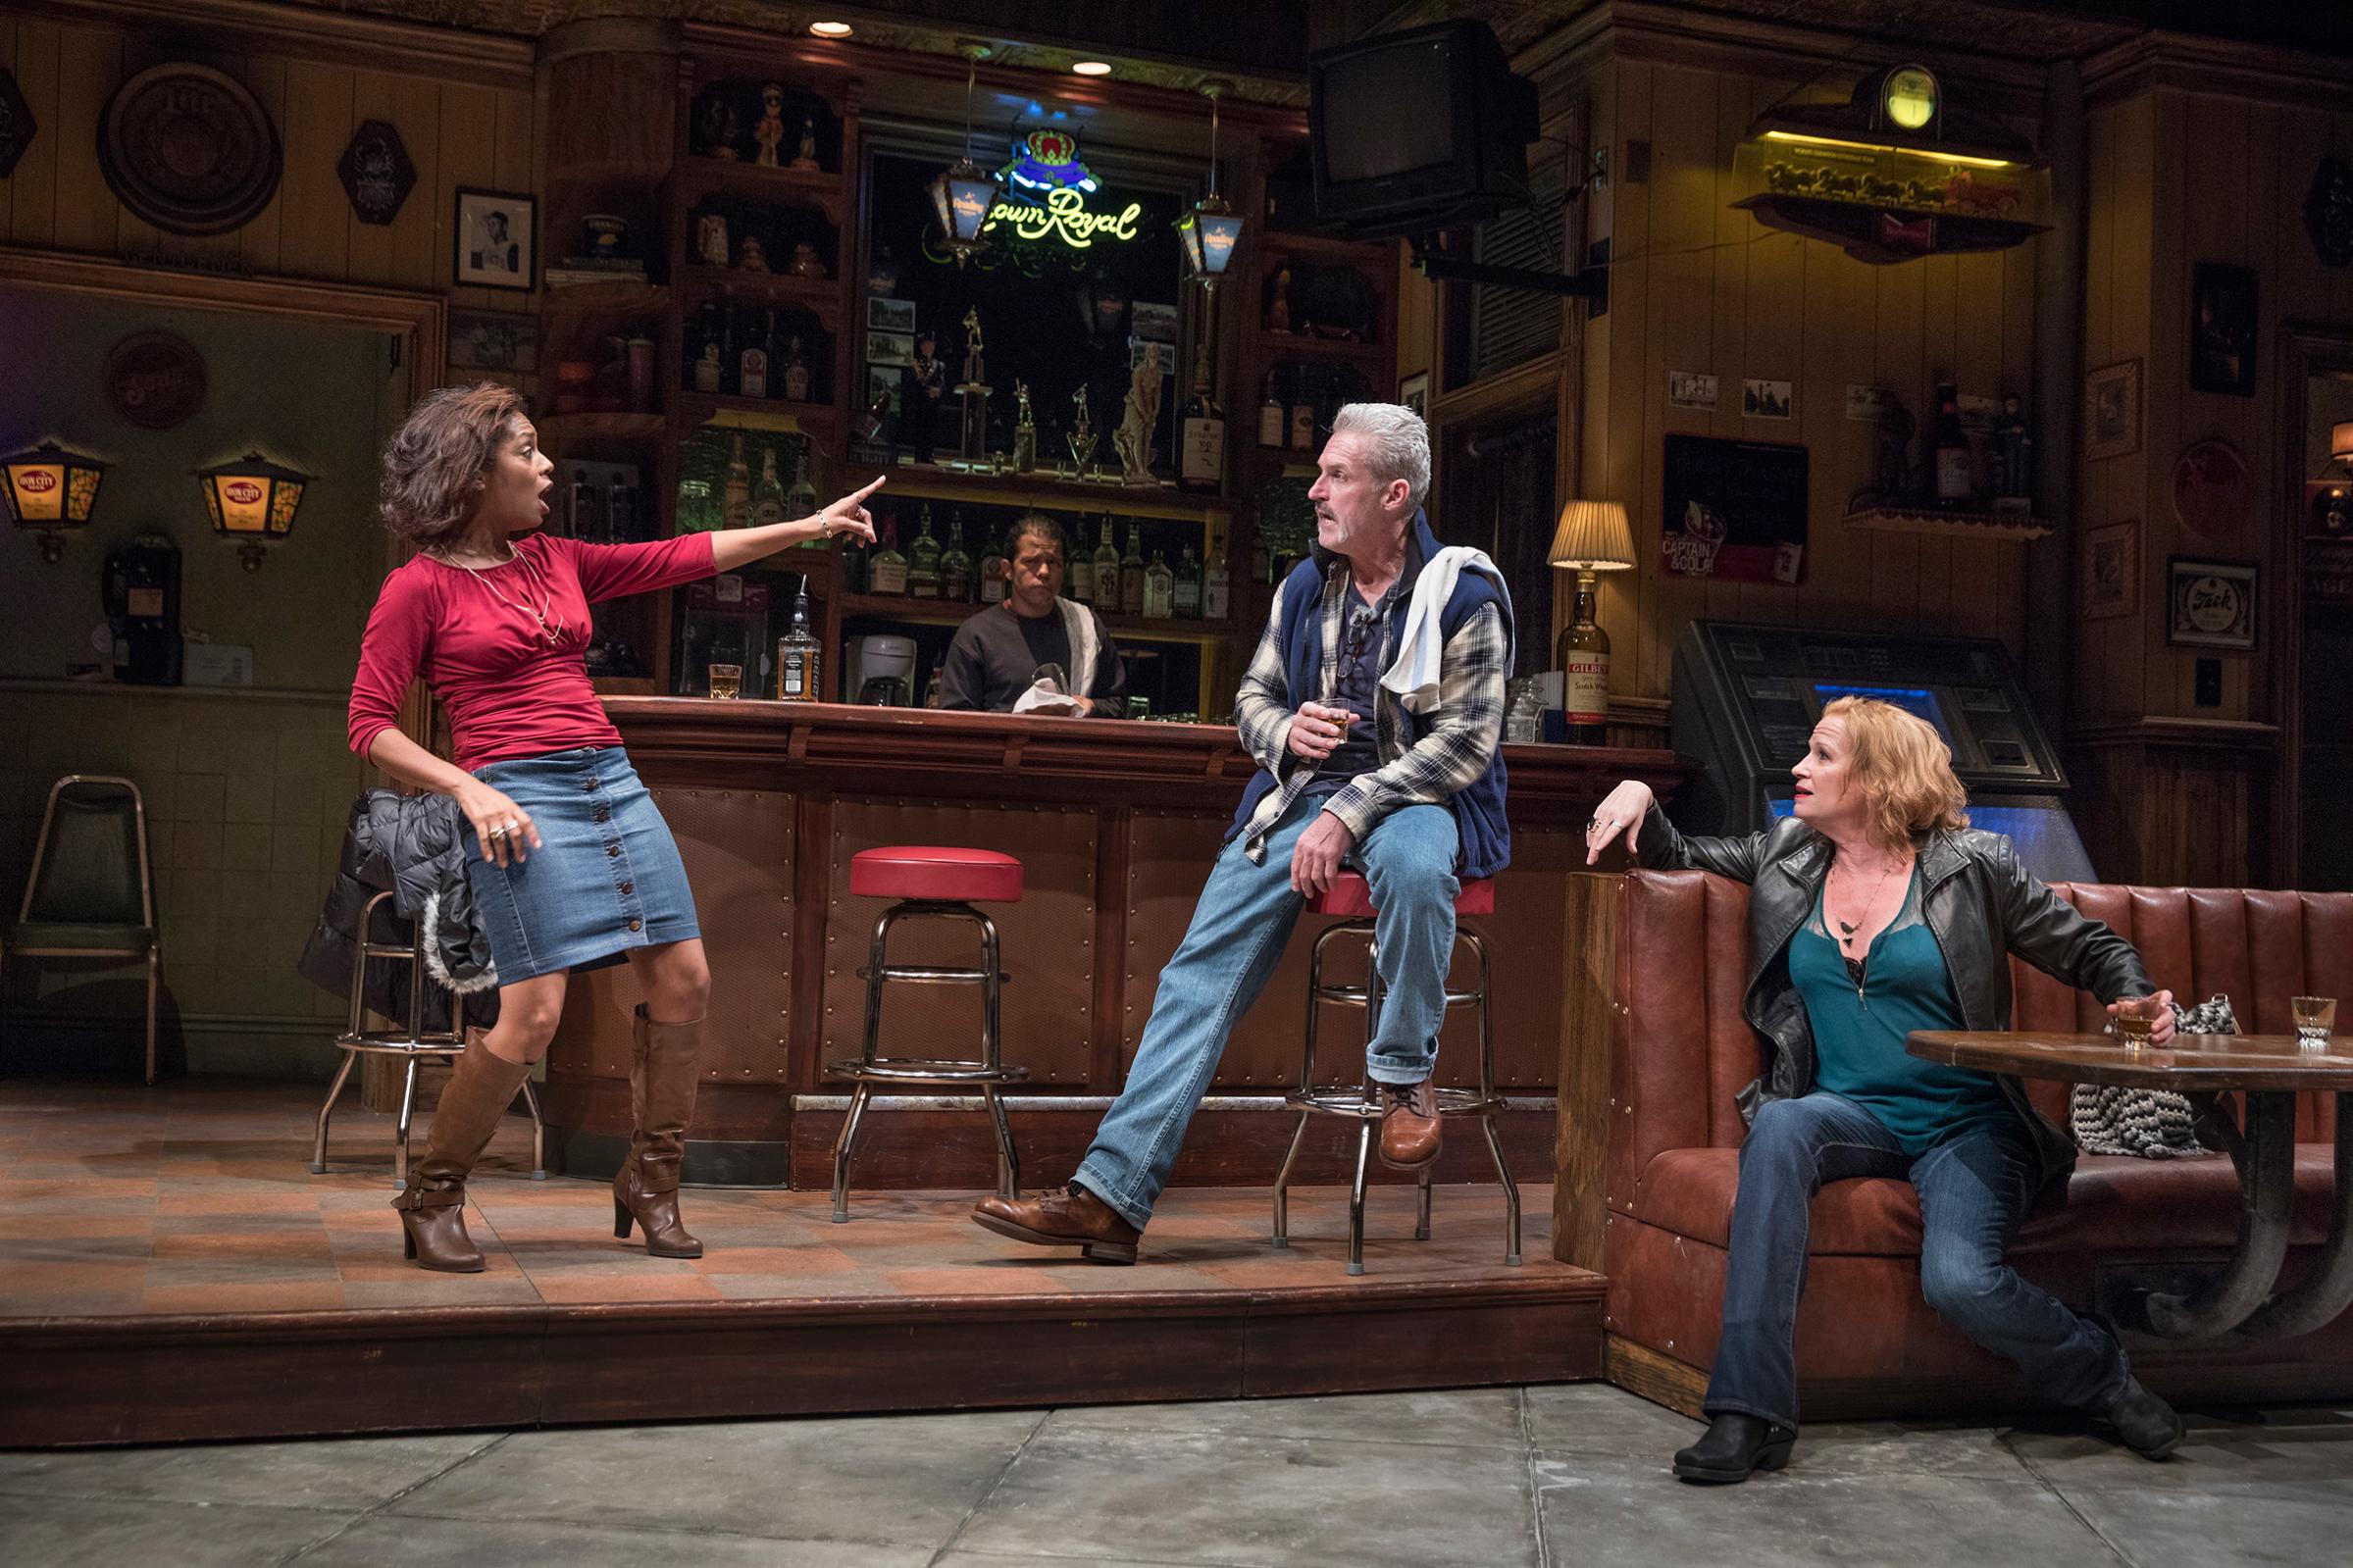 From left: Michelle Wilson, James Colby and Johanna Day in "Sweat," at the Public theater in New York.